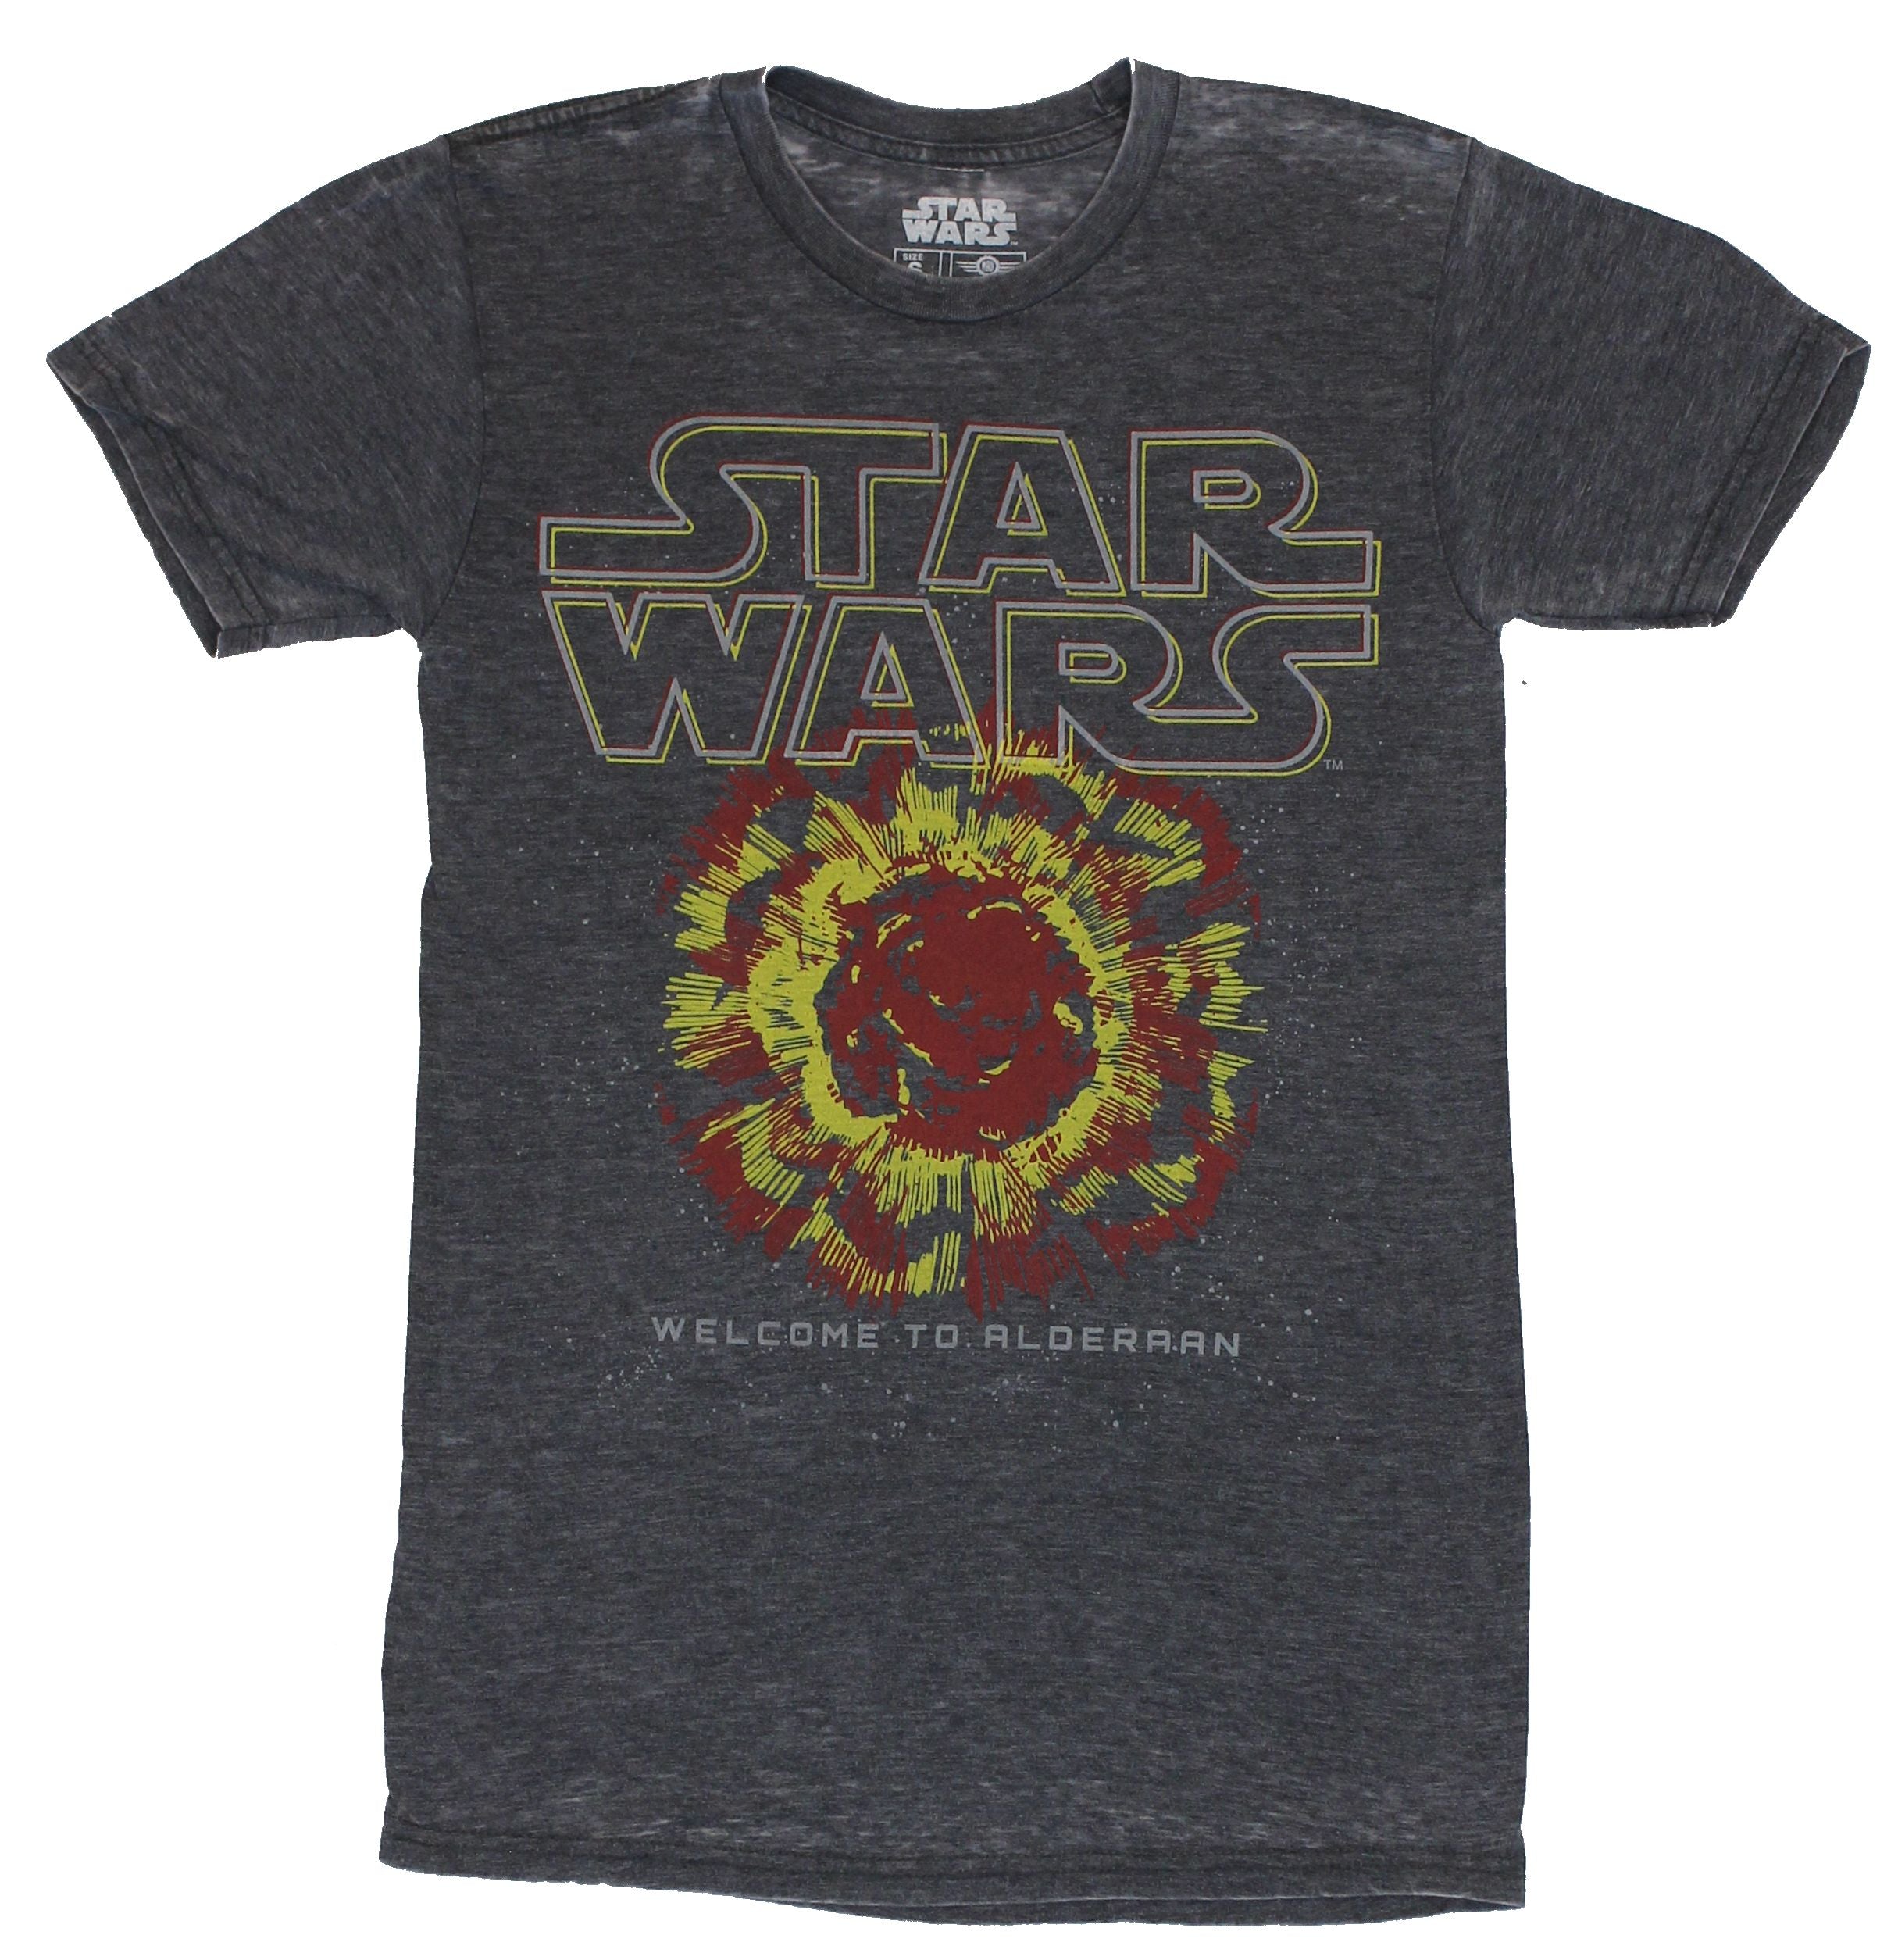 Star Wars Mens T-Shirt - "Welcome to Alderaan" Exploding Planet Image